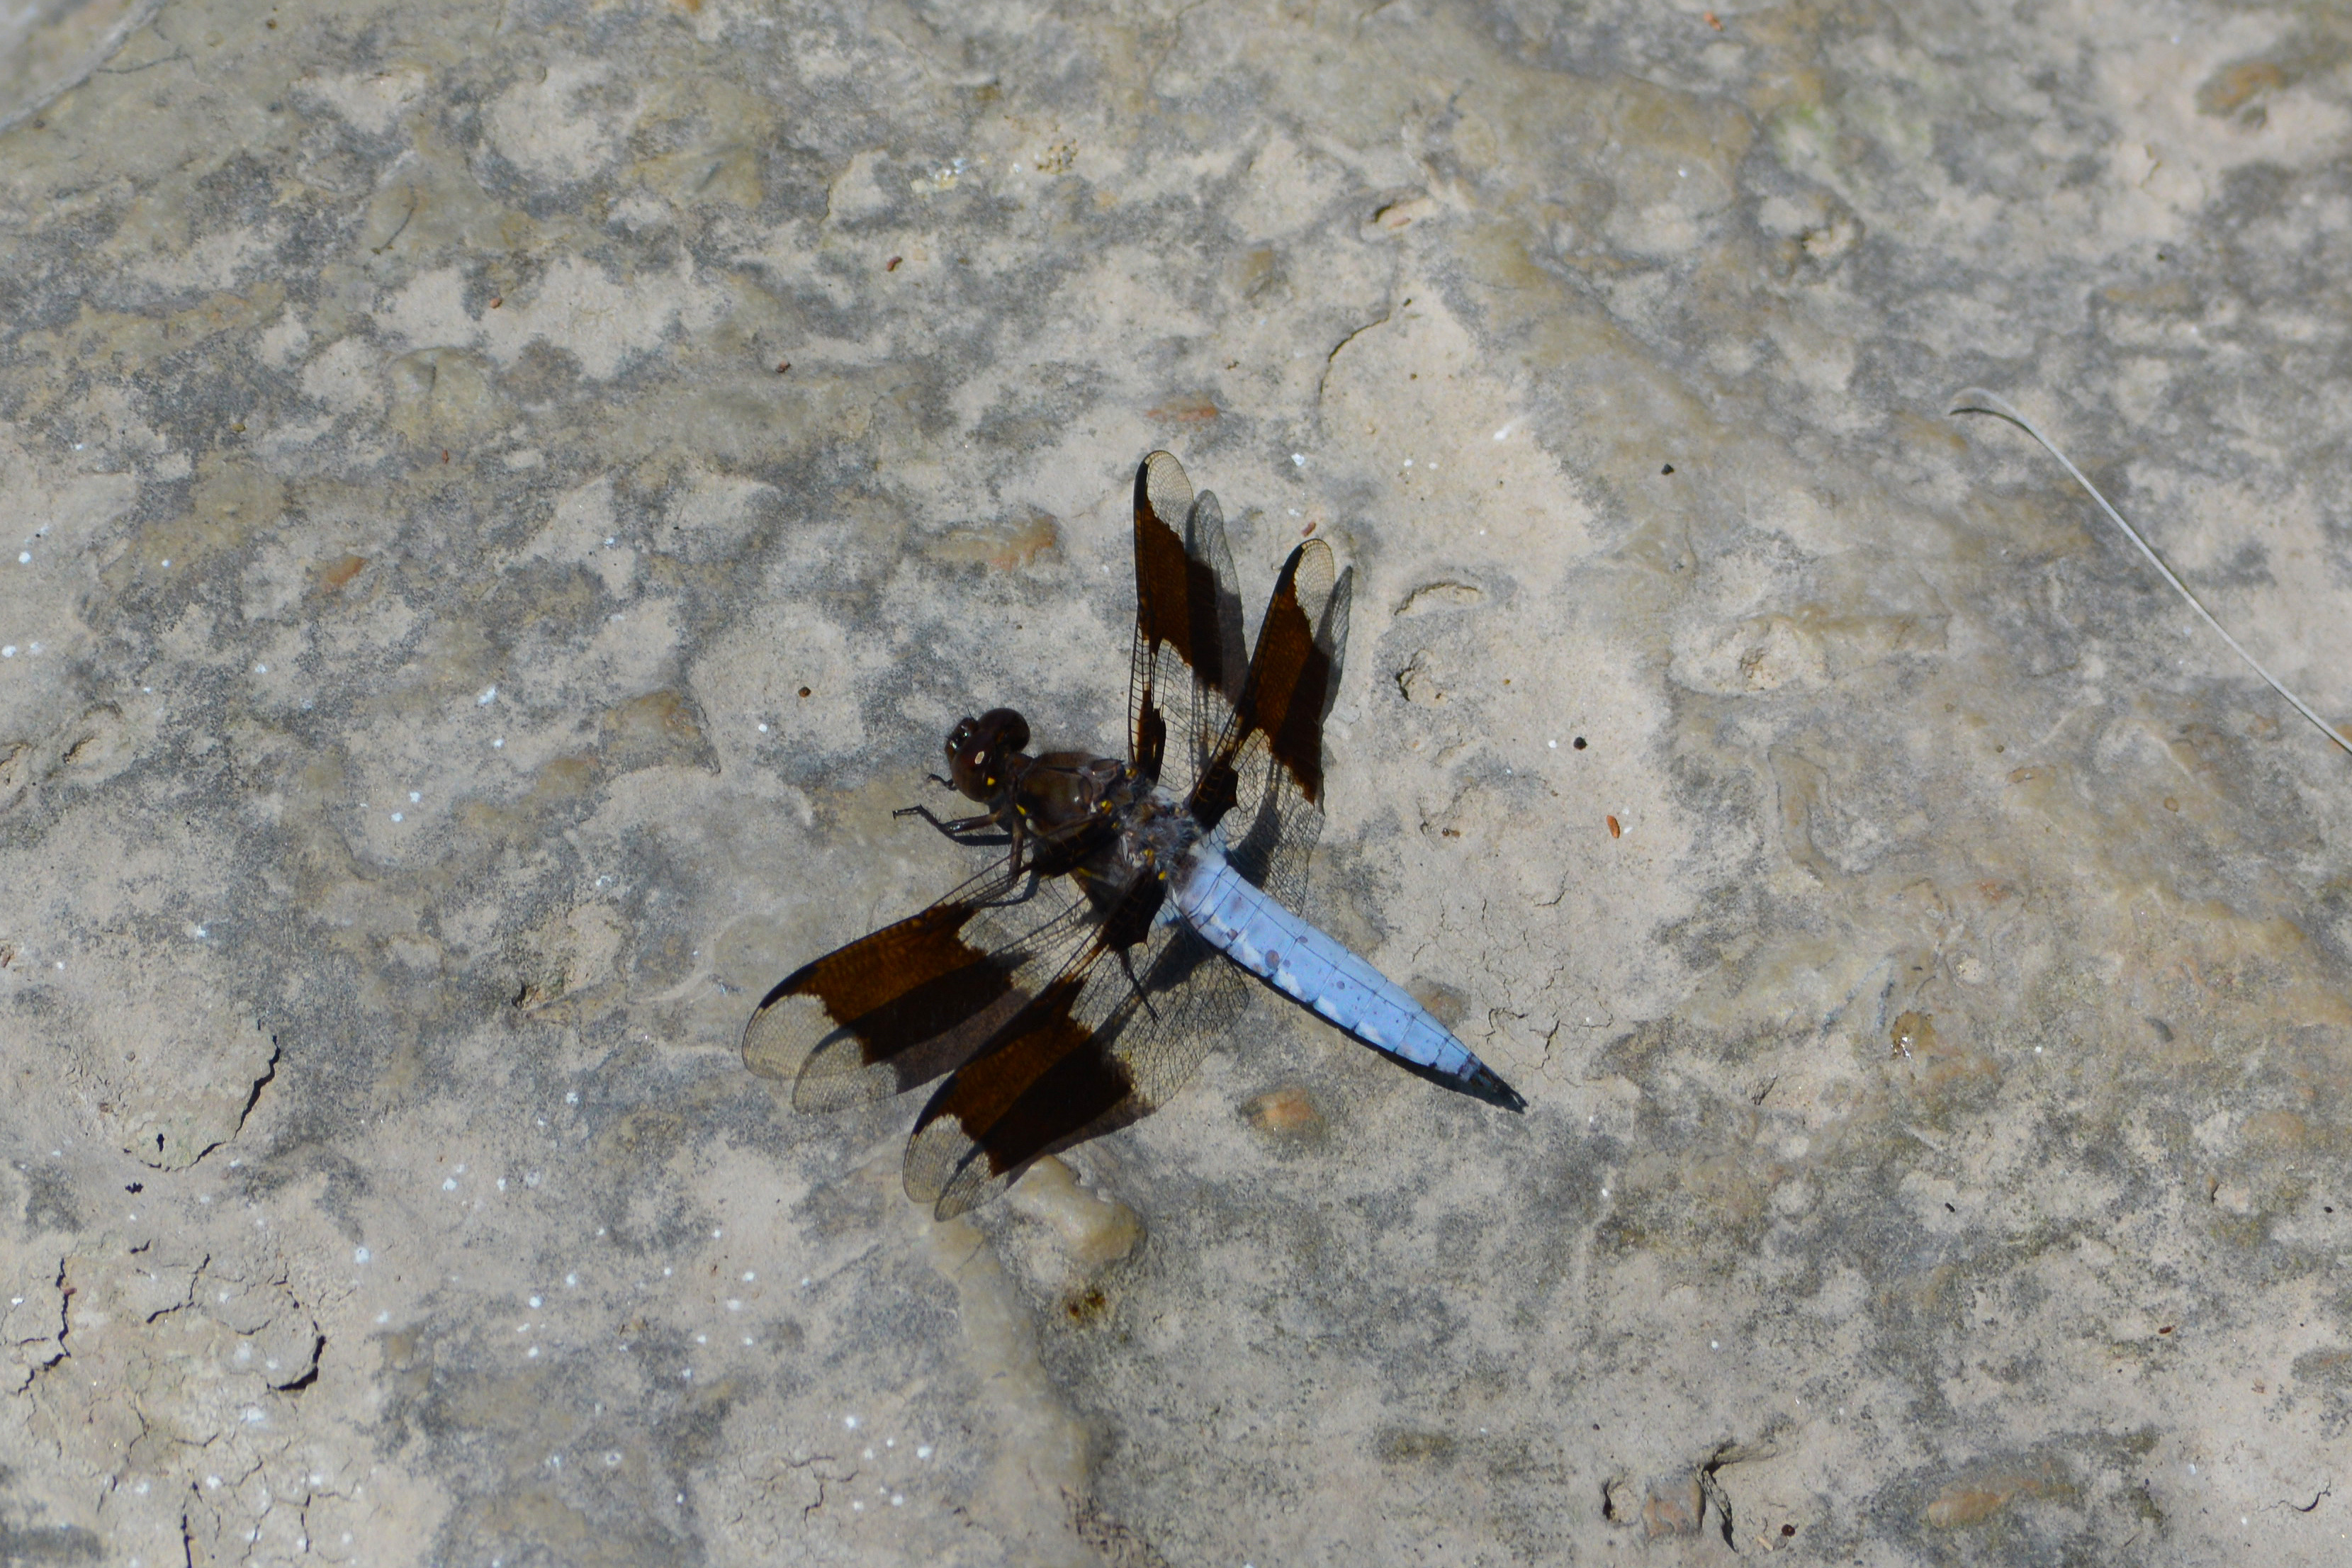 A dragonfly spotted on the shores of the Milwaukee River in Estabrook Park